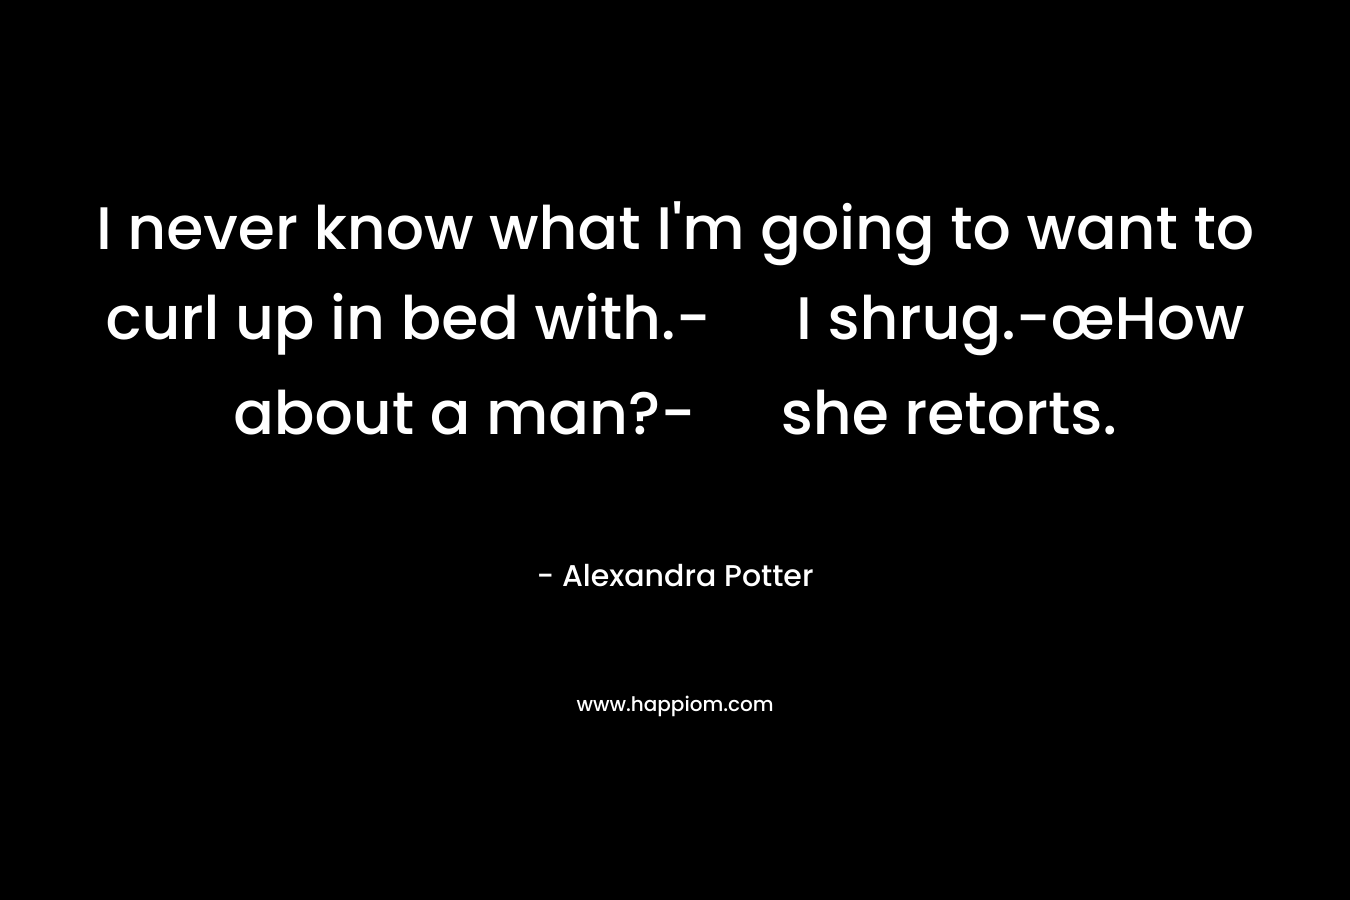 I never know what I’m going to want to curl up in bed with.- I shrug.-œHow about a man?- she retorts. – Alexandra Potter